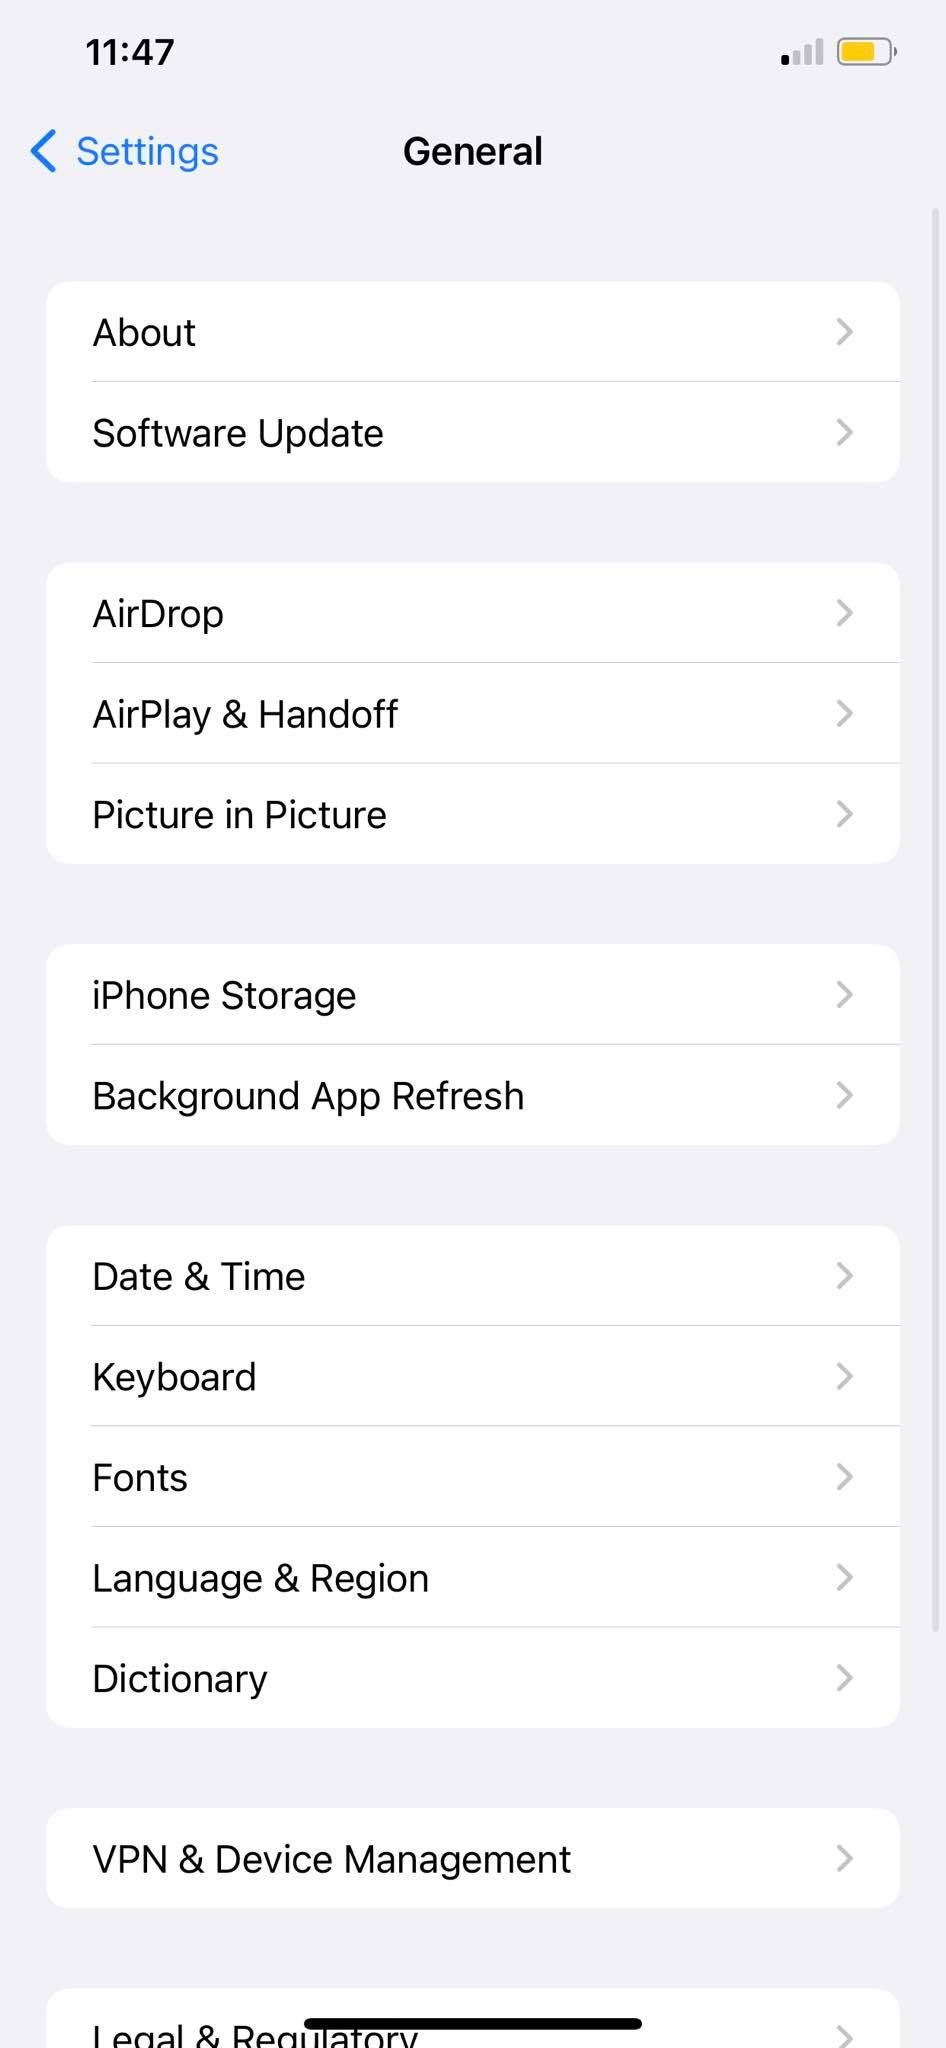 The general page of iPhone settings